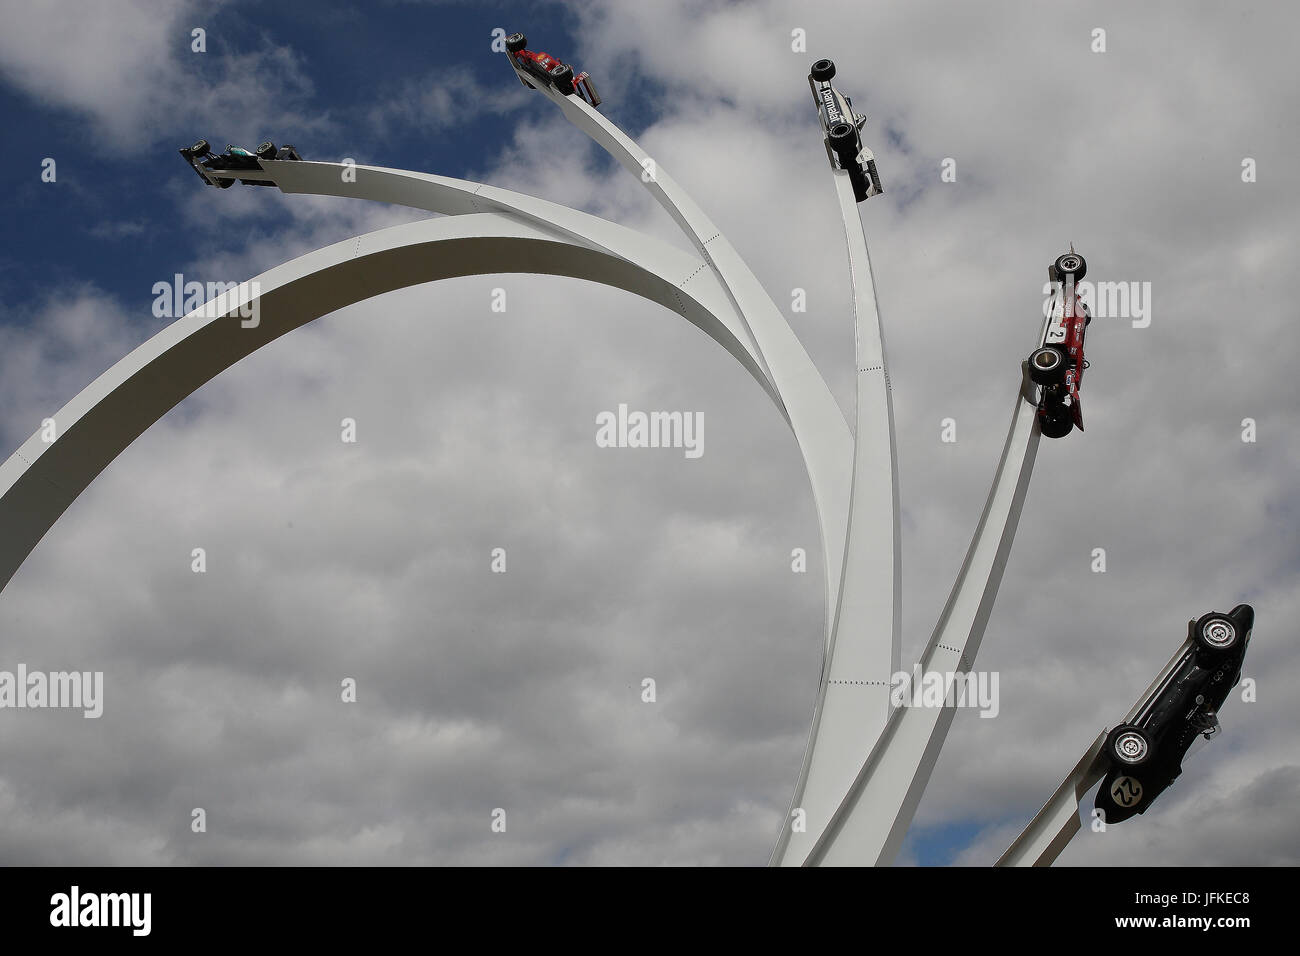 Goodwood, UK. 1st July, 2017. five ages of Bernie Ecclestone central feature at the Goodwood Festival of Speed. Credit: Malcolm Greig/Alamy Live News Stock Photo